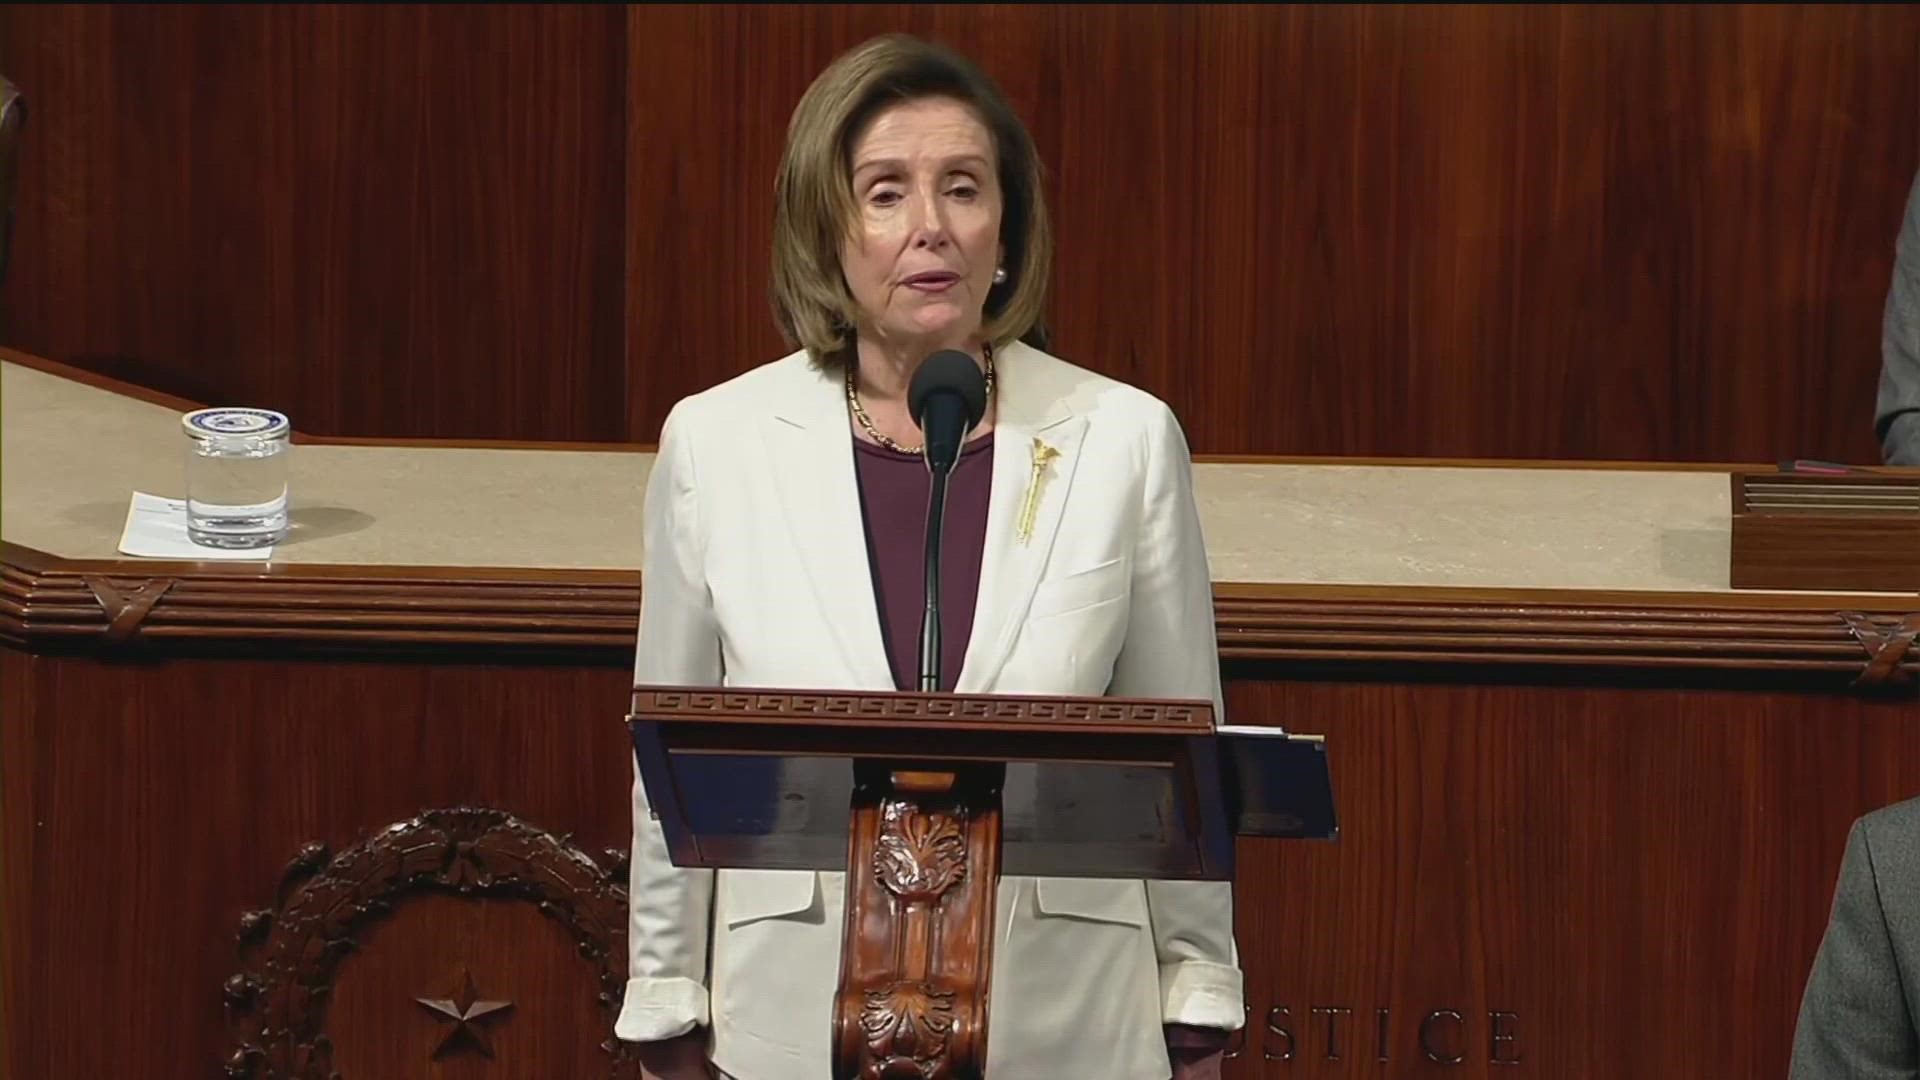 House Speaker Nancy Pelosi announced she would step down from her congressional leadership role, ending a two-decade streak as the top House Democrat.